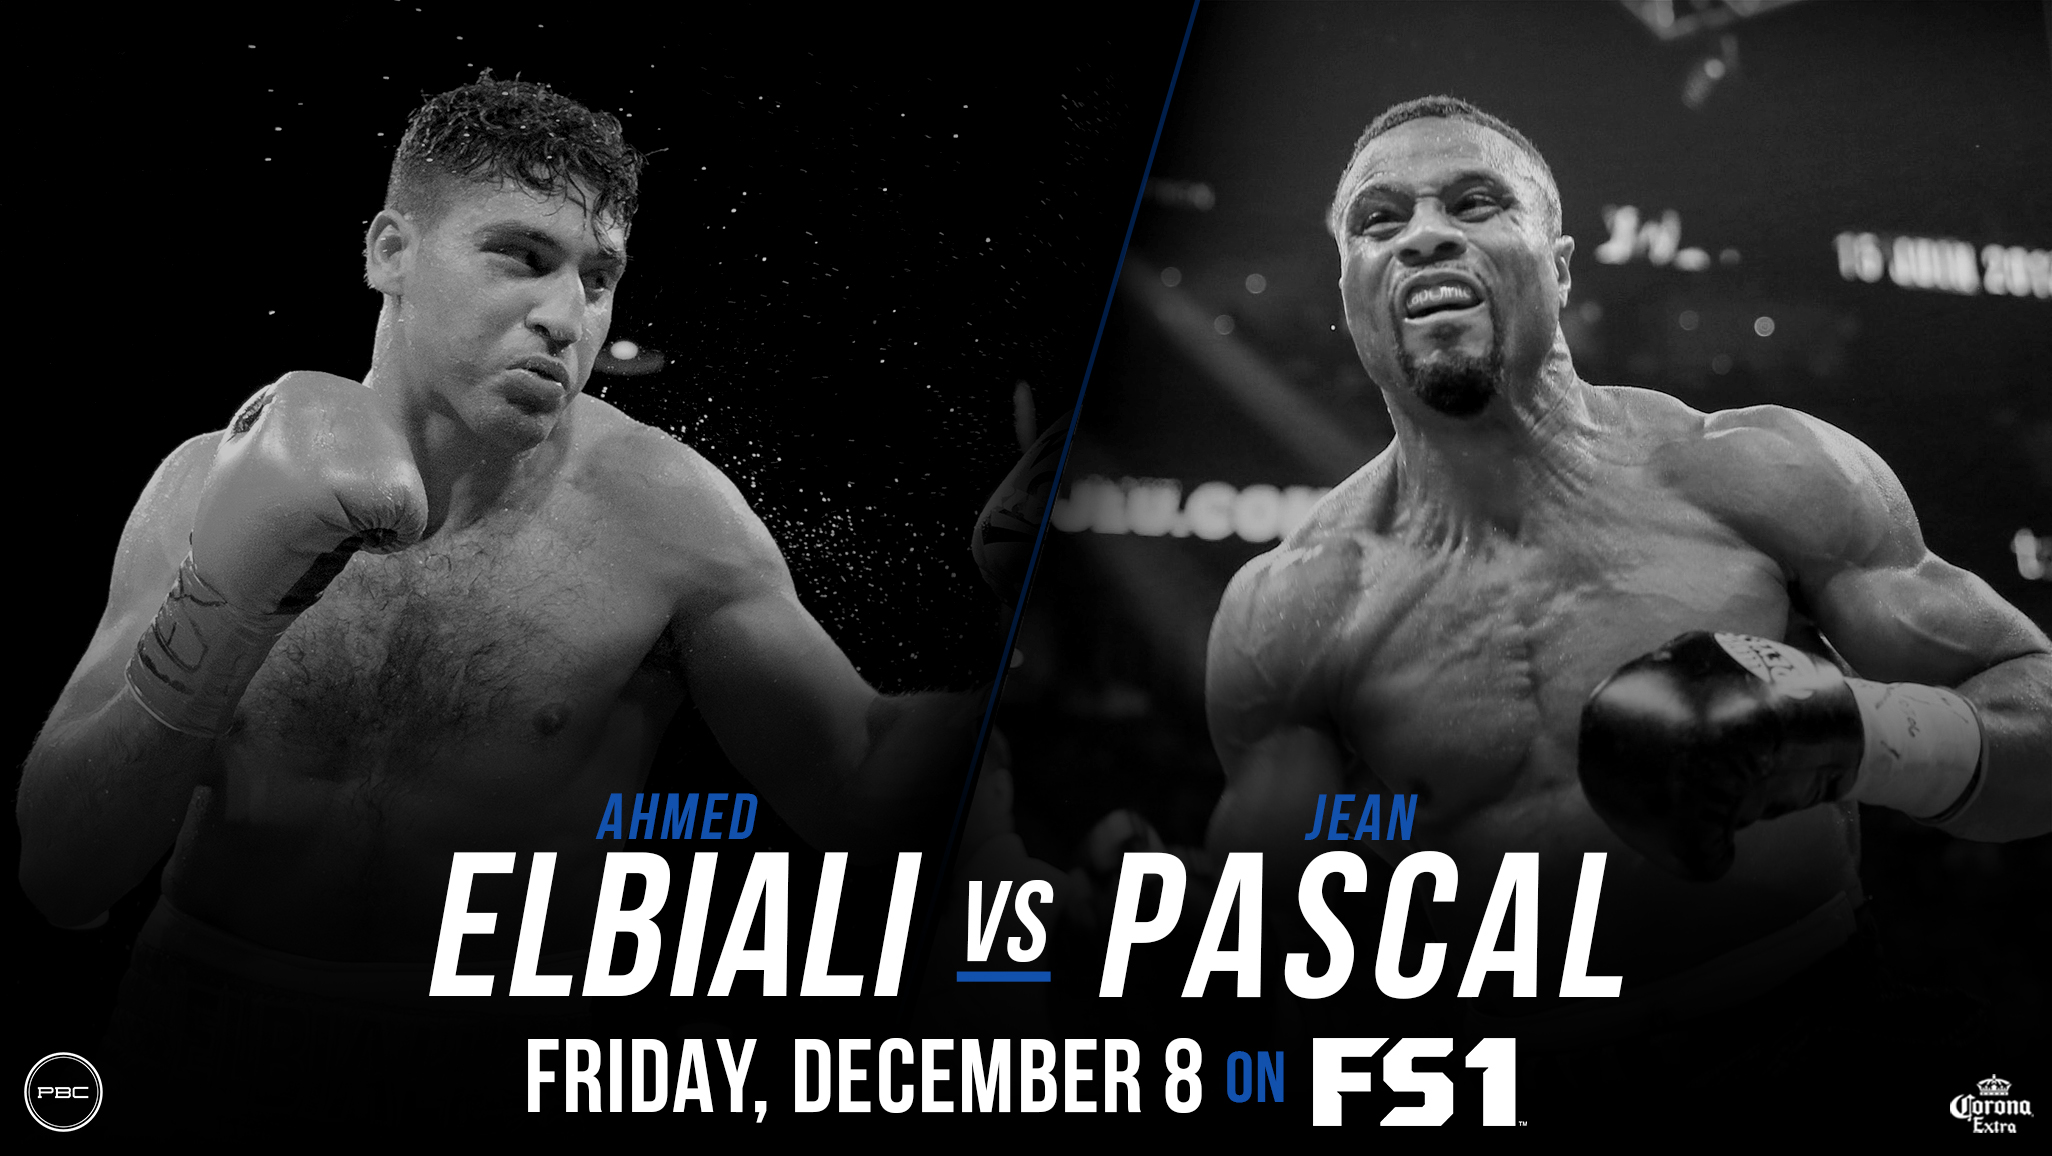 Unbeaten 175-pound contender Ahmed Elbiali clashes With Former World Champion Jean Pascal Dec